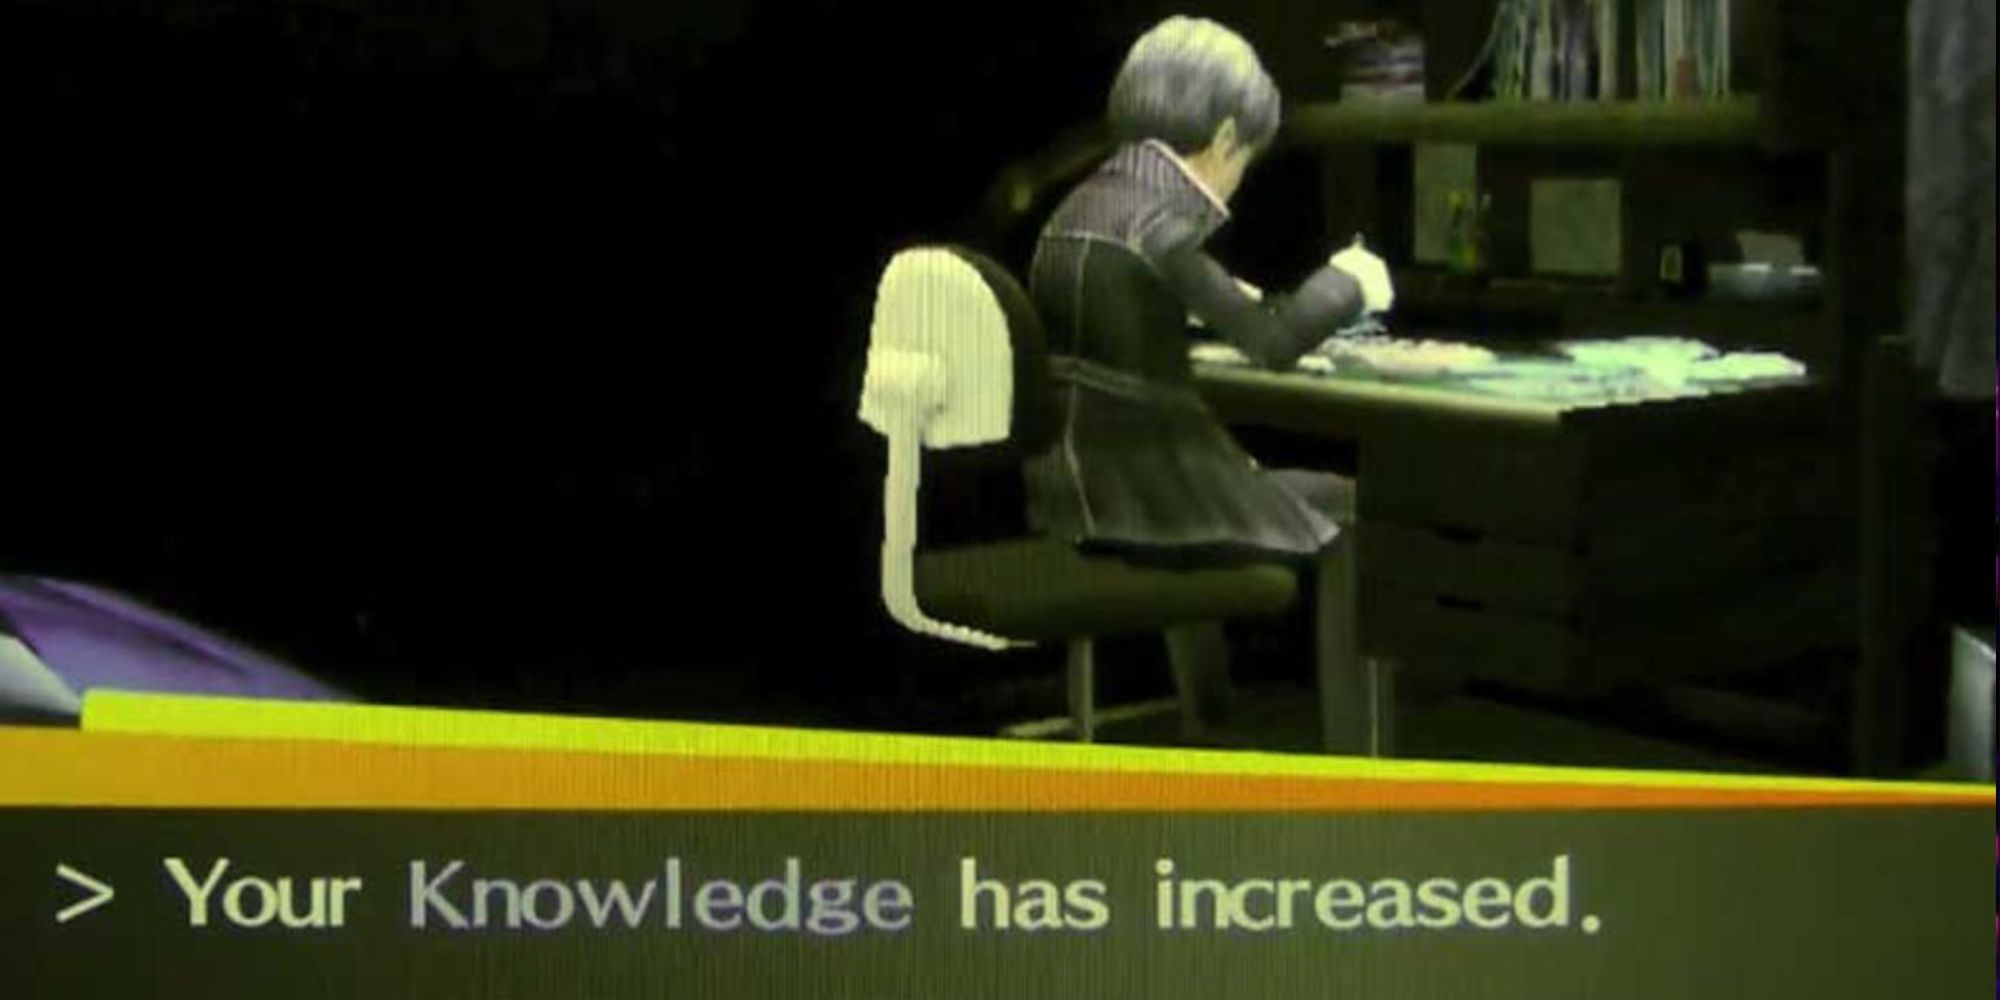 persona 4 golden class answers